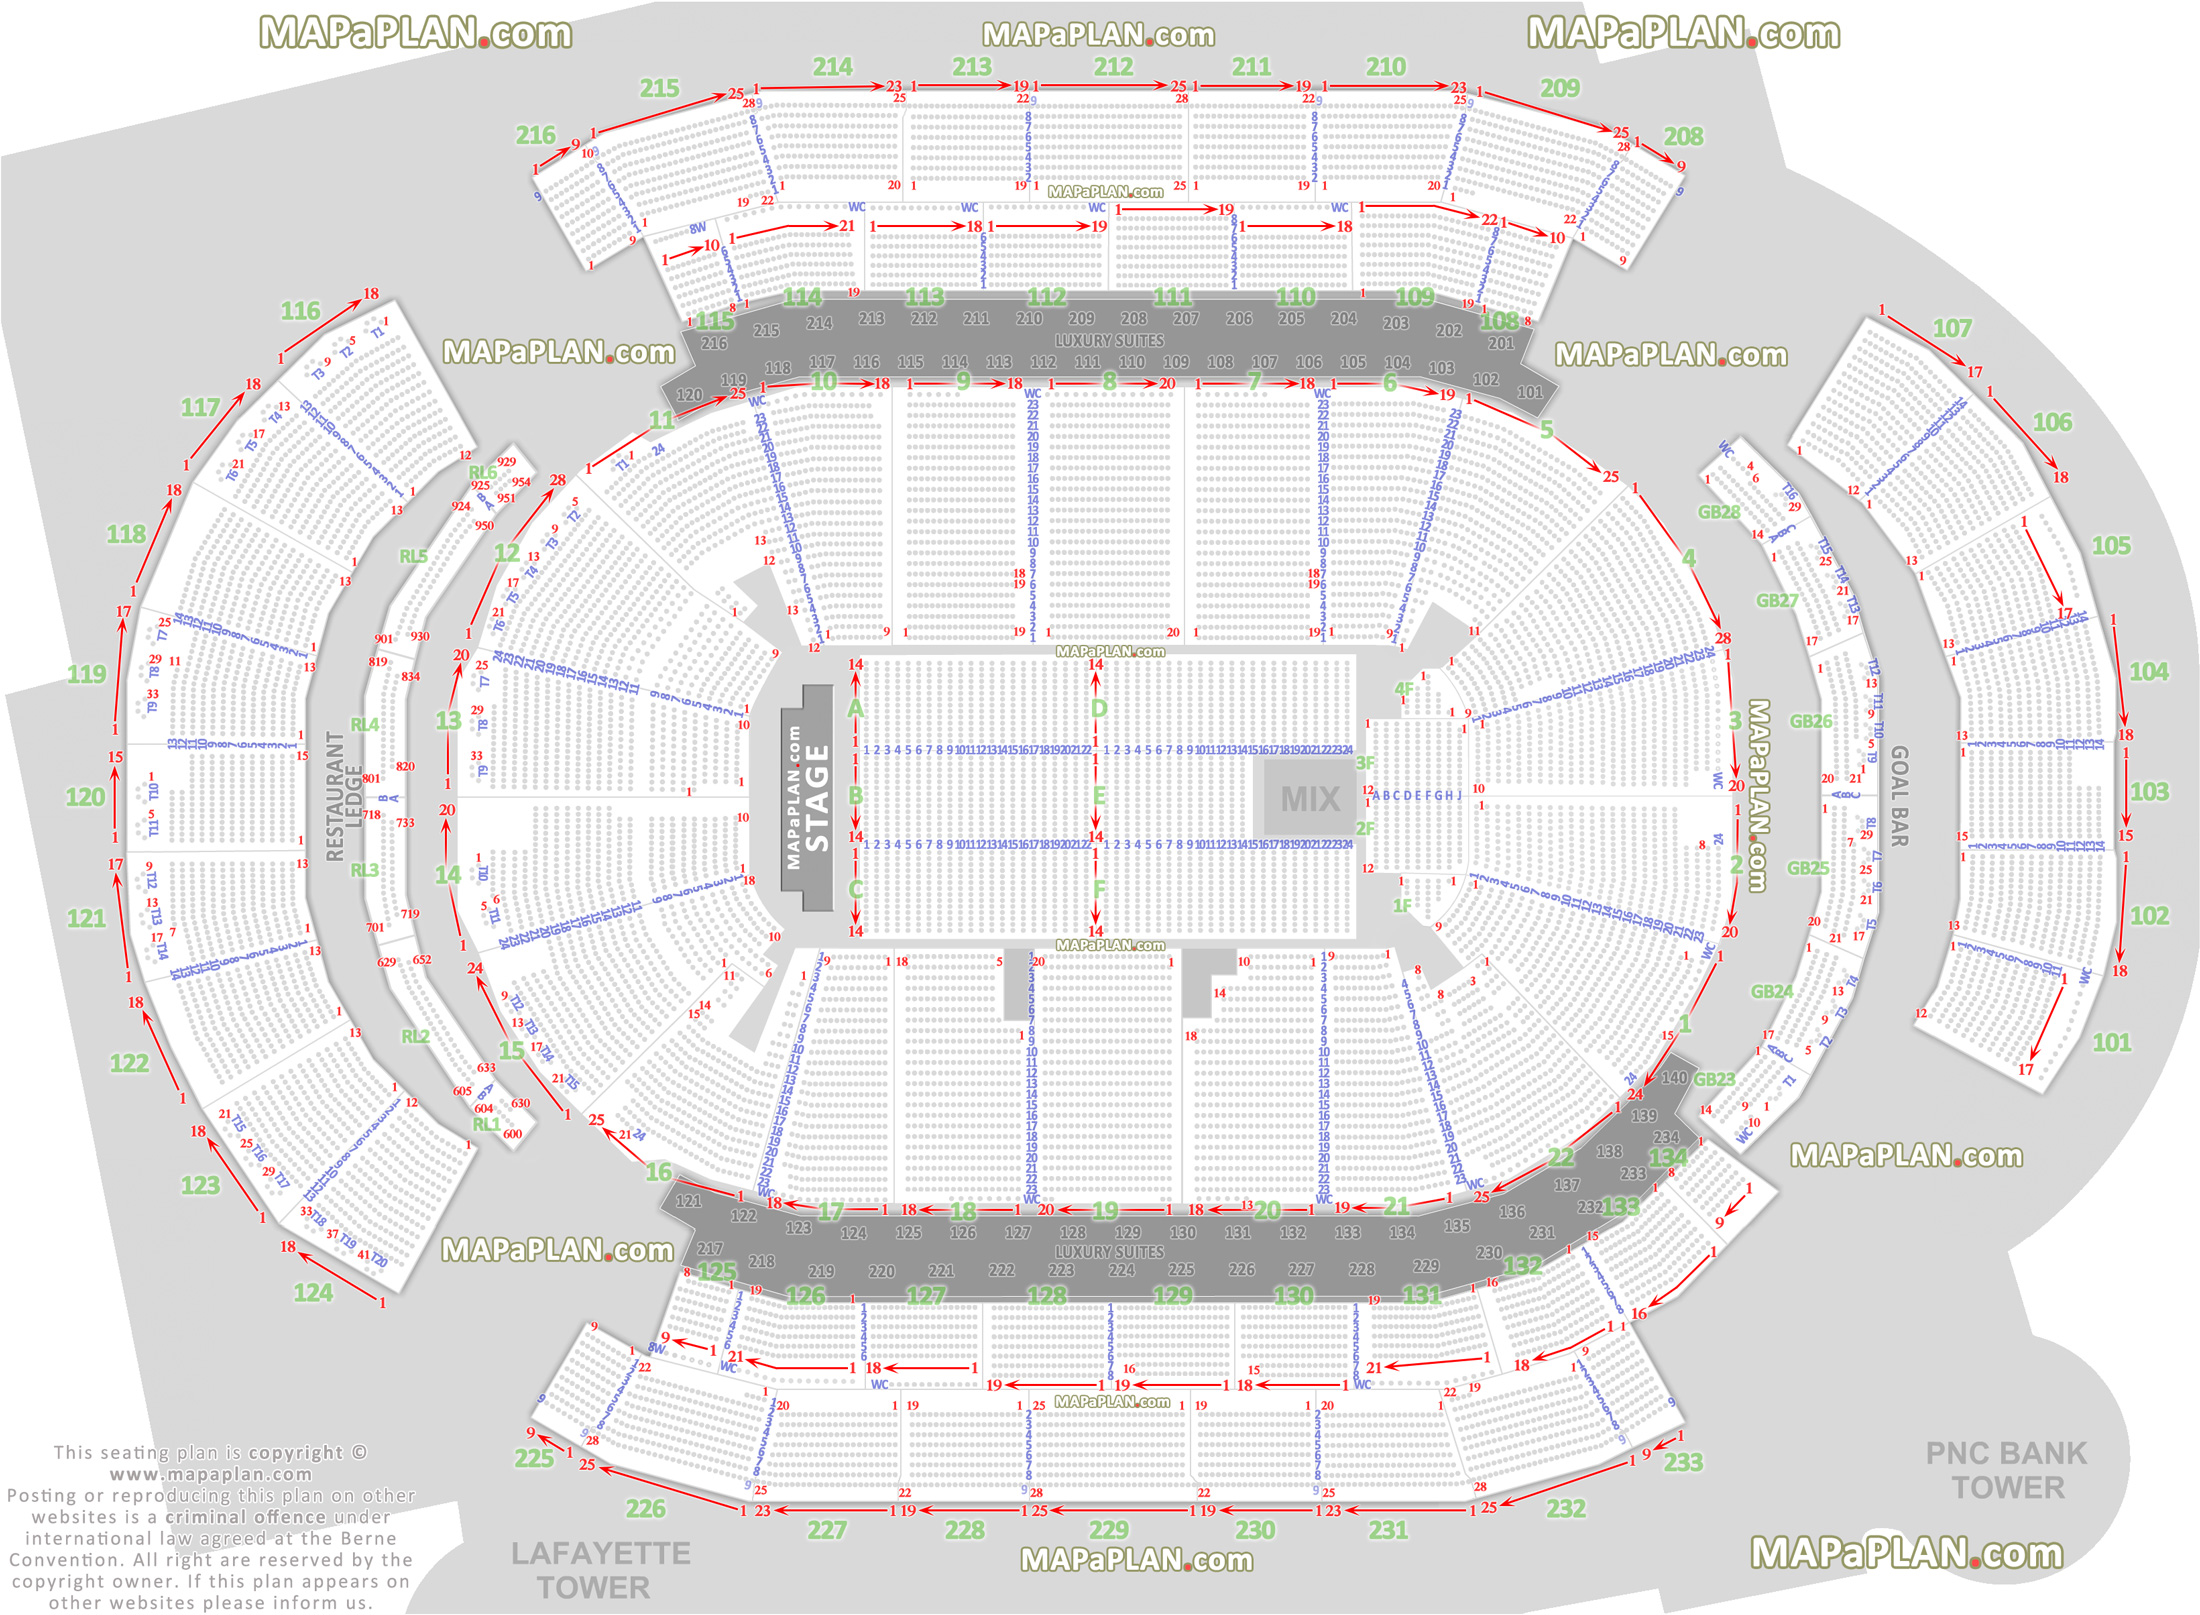 Prudential Center Seton Hall Seating Chart